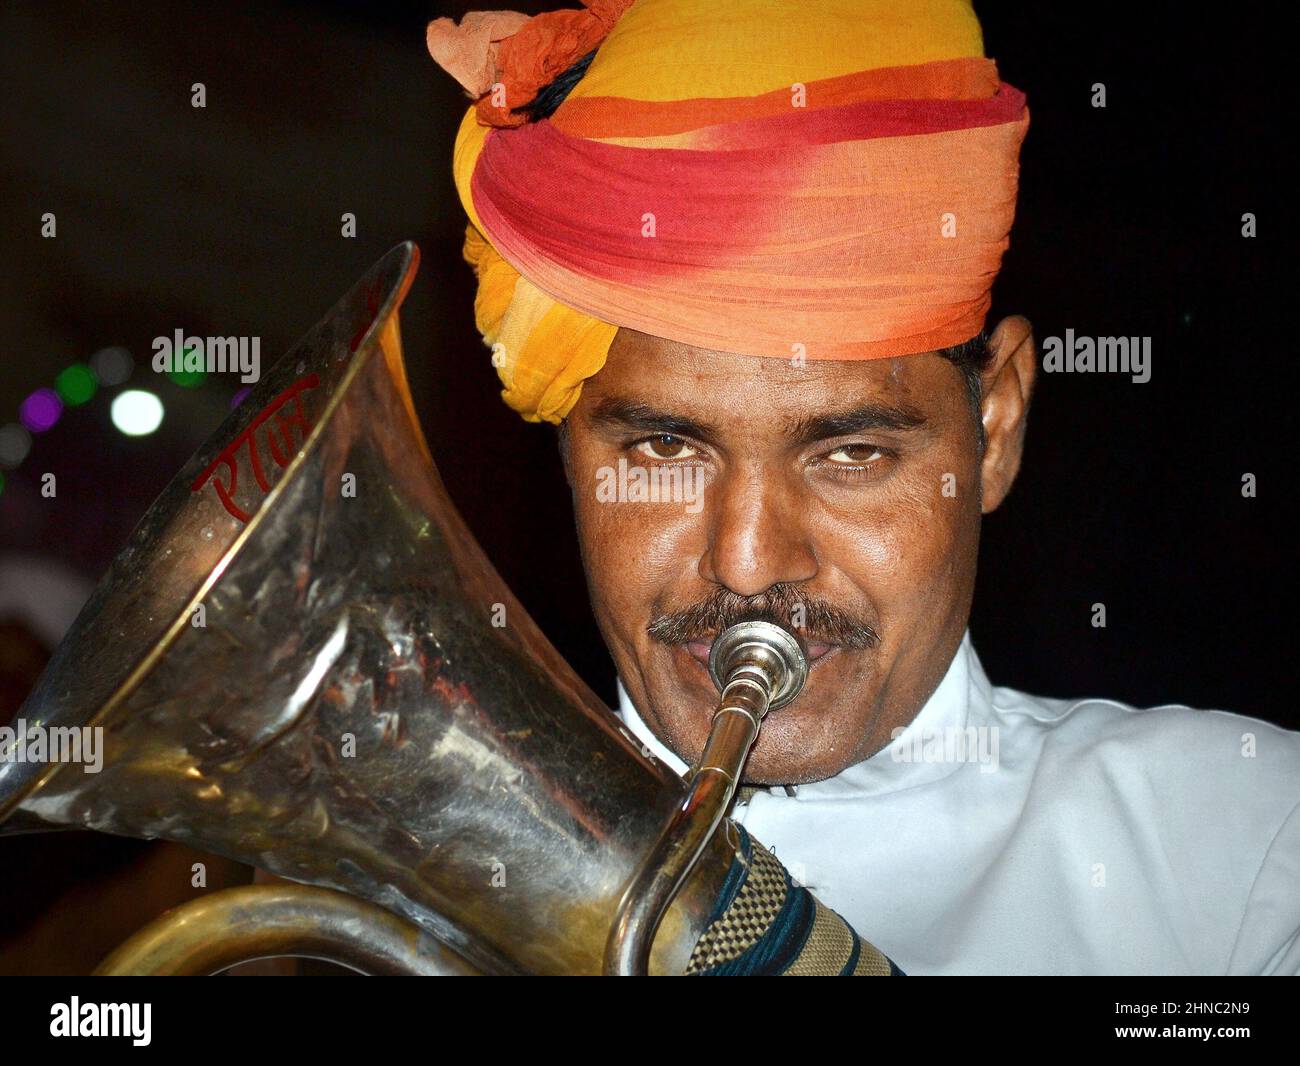 Young turbaned euphoniumist from a marching Indian British brass band plays at night his traditional euphonium instrument and looks at the camera. Stock Photo